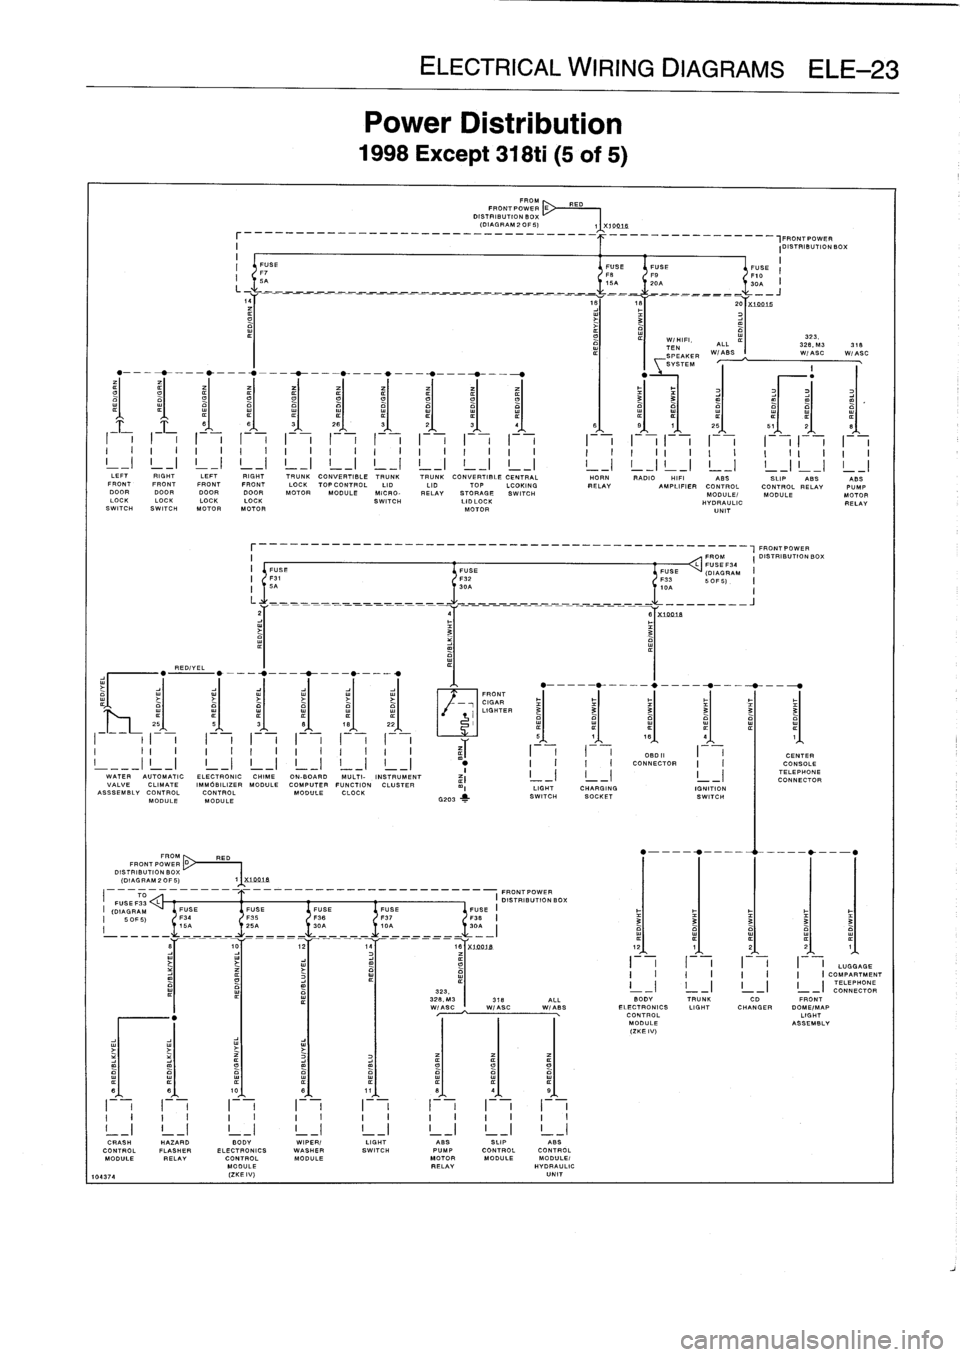 BMW 328i 1997 E36 Workshop Manual 
REDIYEL

FROM
RED
FRONT
PO
WE
R
D~
DISTRIBUTION
BOX
(DIAGRAM
2
OF
5)

_
_
_
_
_
_
_
_
_
_
__
,FRONTPOWER
I

	

IDISTRIBUTIONBOX
I

	

II
FUSE

	

FUSEFUSE

	

FUSE
F7

	

FS

	

FO

	

F10
I
I
5A

	
